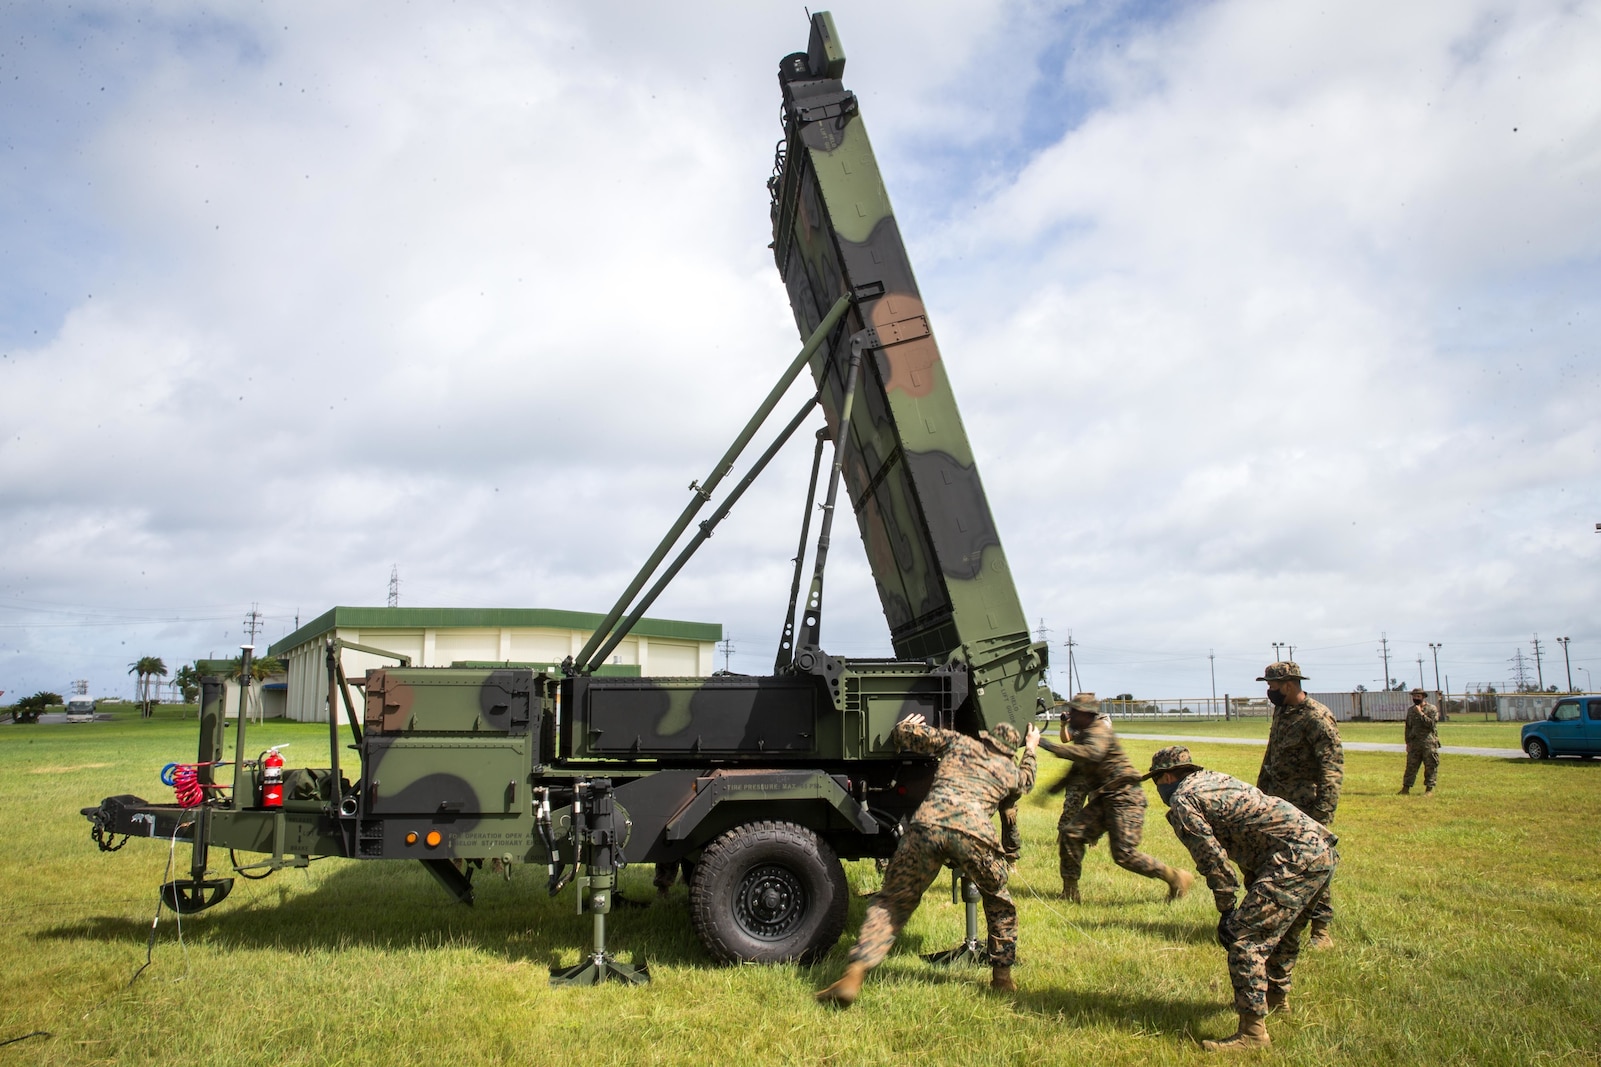 U.S. Marines with 12th Marine Regiment, 3rd Marine Division, adjust a Ground/Air Task Oriented Radar system at Marine Corps Air Station Futenma, Okinawa, Japan, Aug. 10, 2020. The G/ATOR provides an air defense and surveillance capability and is used to locate enemy weapon systems. Having these capabilities further enhances Marines’ missions and increases lethality. G/ATOR is one of the Corps’ key capabilities supporting Force Design 2030.